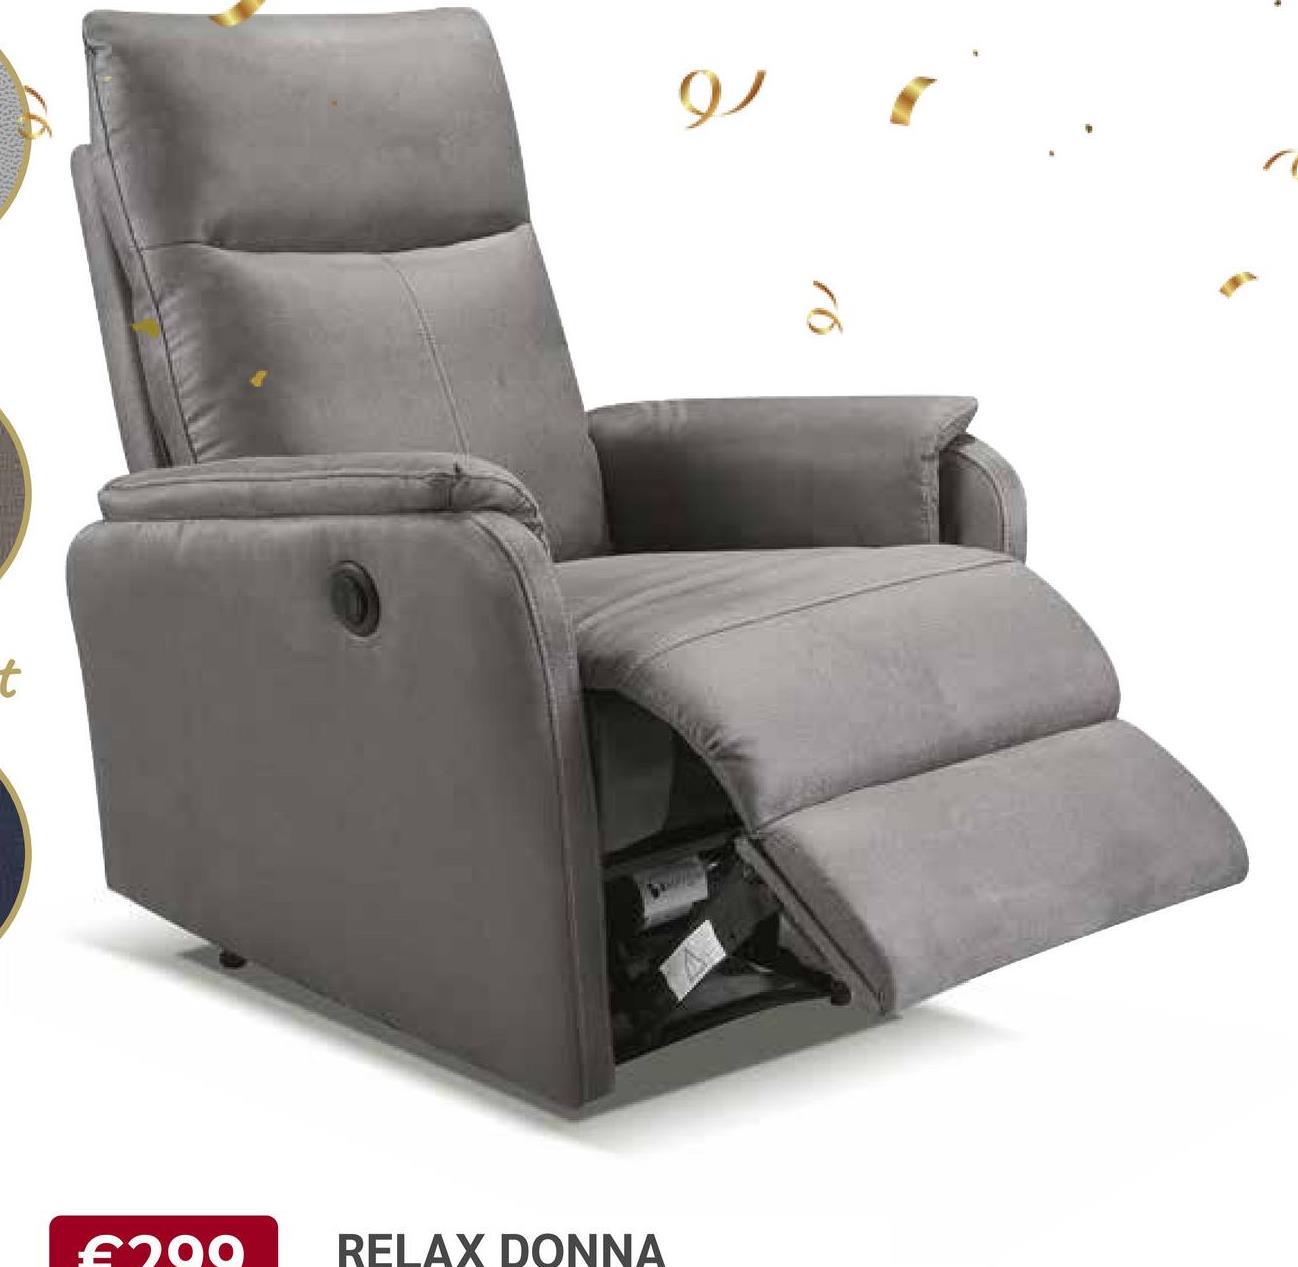 t
€299 RELAX DONNA
9
رلا